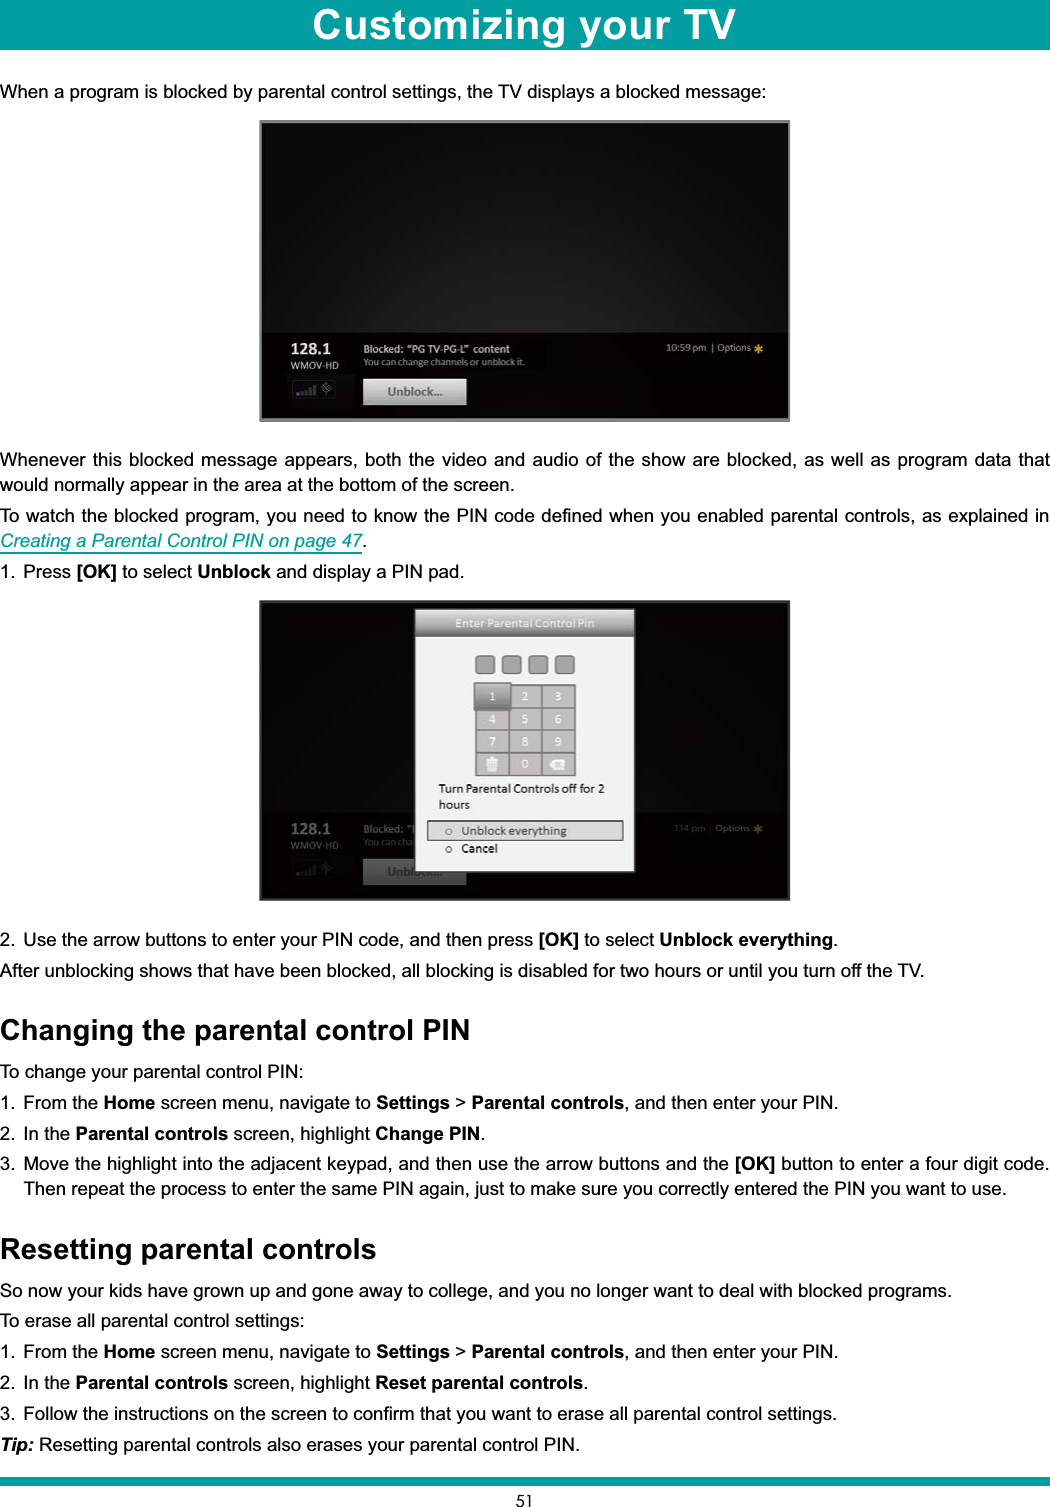 51When a program is blocked by parental control settings, the TV displays a blocked message:Whenever this blocked message appears, both the video and audio of the show are blocked, as well as program data that would normally appear in the area at the bottom of the screen.To watch the blocked program, you need to know the PIN code defined when you enabled parental controls, as explained in Creating a Parental Control PIN on page 47.1. Press [OK] to select Unblock and display a PIN pad.2. Use the arrow buttons to enter your PIN code, and then press [OK] to select Unblock everything.After unblocking shows that have been blocked, all blocking is disabled for two hours or until you turn off the TV.Changing the parental control PINTo change your parental control PIN:1. From the Home screen menu, navigate to Settings &gt; Parental controls, and then enter your PIN.2. In the Parental controls screen, highlight Change PIN.3. Move the highlight into the adjacent keypad, and then use the arrow buttons and the [OK] button to enter a four digit code. Then repeat the process to enter the same PIN again, just to make sure you correctly entered the PIN you want to use.Resetting parental controlsSo now your kids have grown up and gone away to college, and you no longer want to deal with blocked programs.To erase all parental control settings:1. From the Home screen menu, navigate to Settings &gt; Parental controls, and then enter your PIN.2. In the Parental controls screen, highlight Reset parental controls.3. Follow the instructions on the screen to confirm that you want to erase all parental control settings.Tip: Resetting parental controls also erases your parental control PIN.Customizing your TV